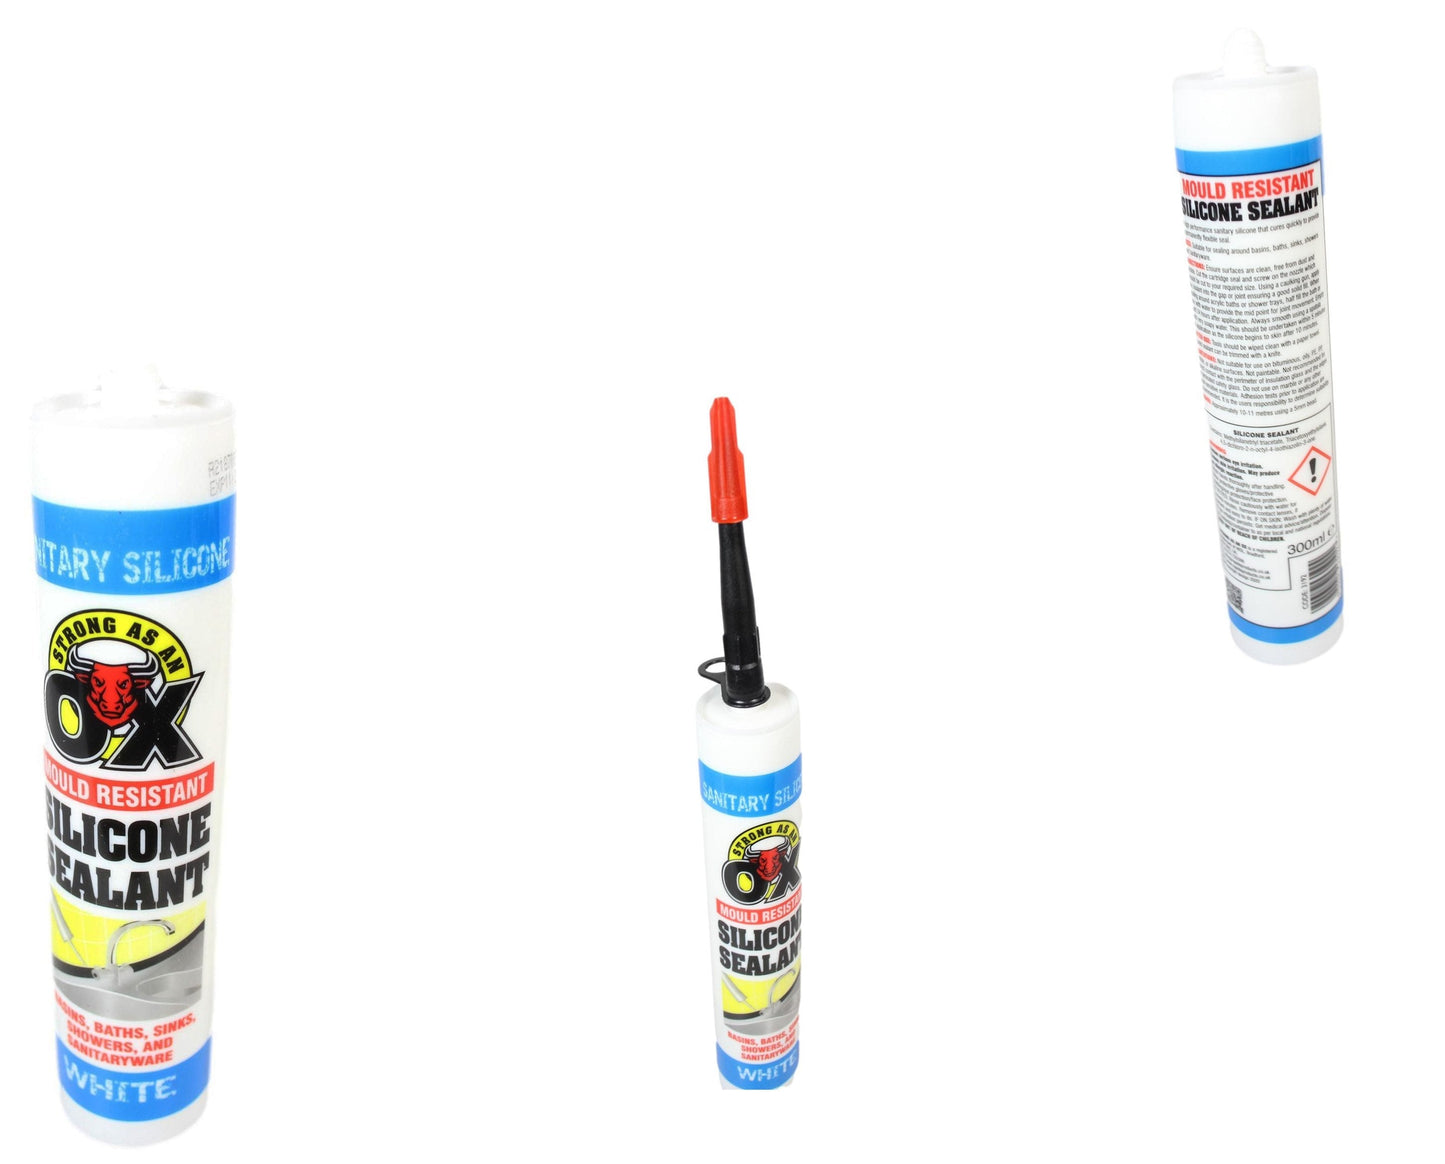 Silicone Sealant Cures Quickly For Permanent Flexible Seal 1 Piece 3192 (Parcel Rate)